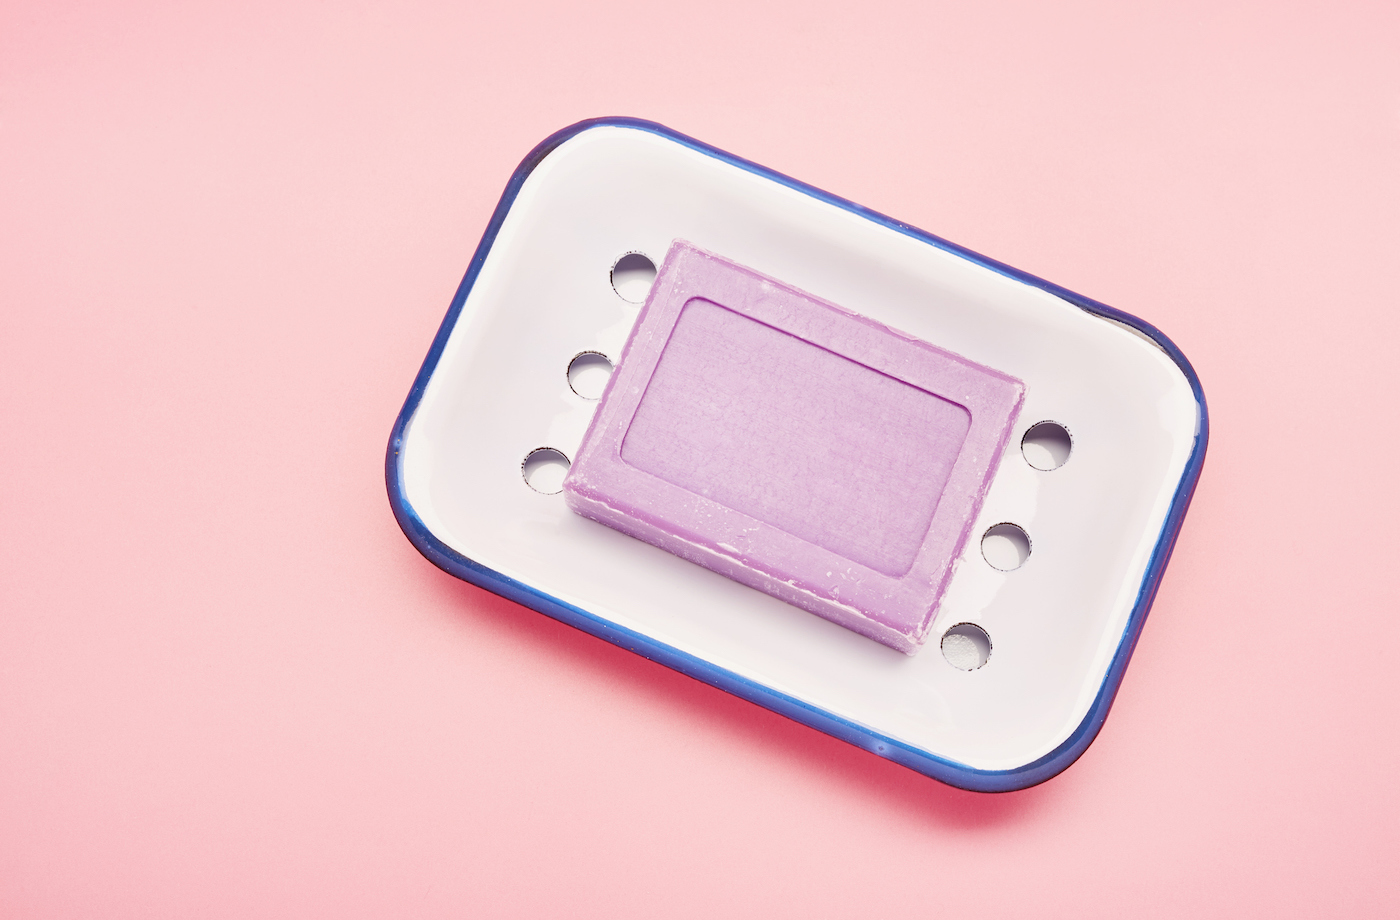 A pink bar soap on a white soap dish with drain holes.